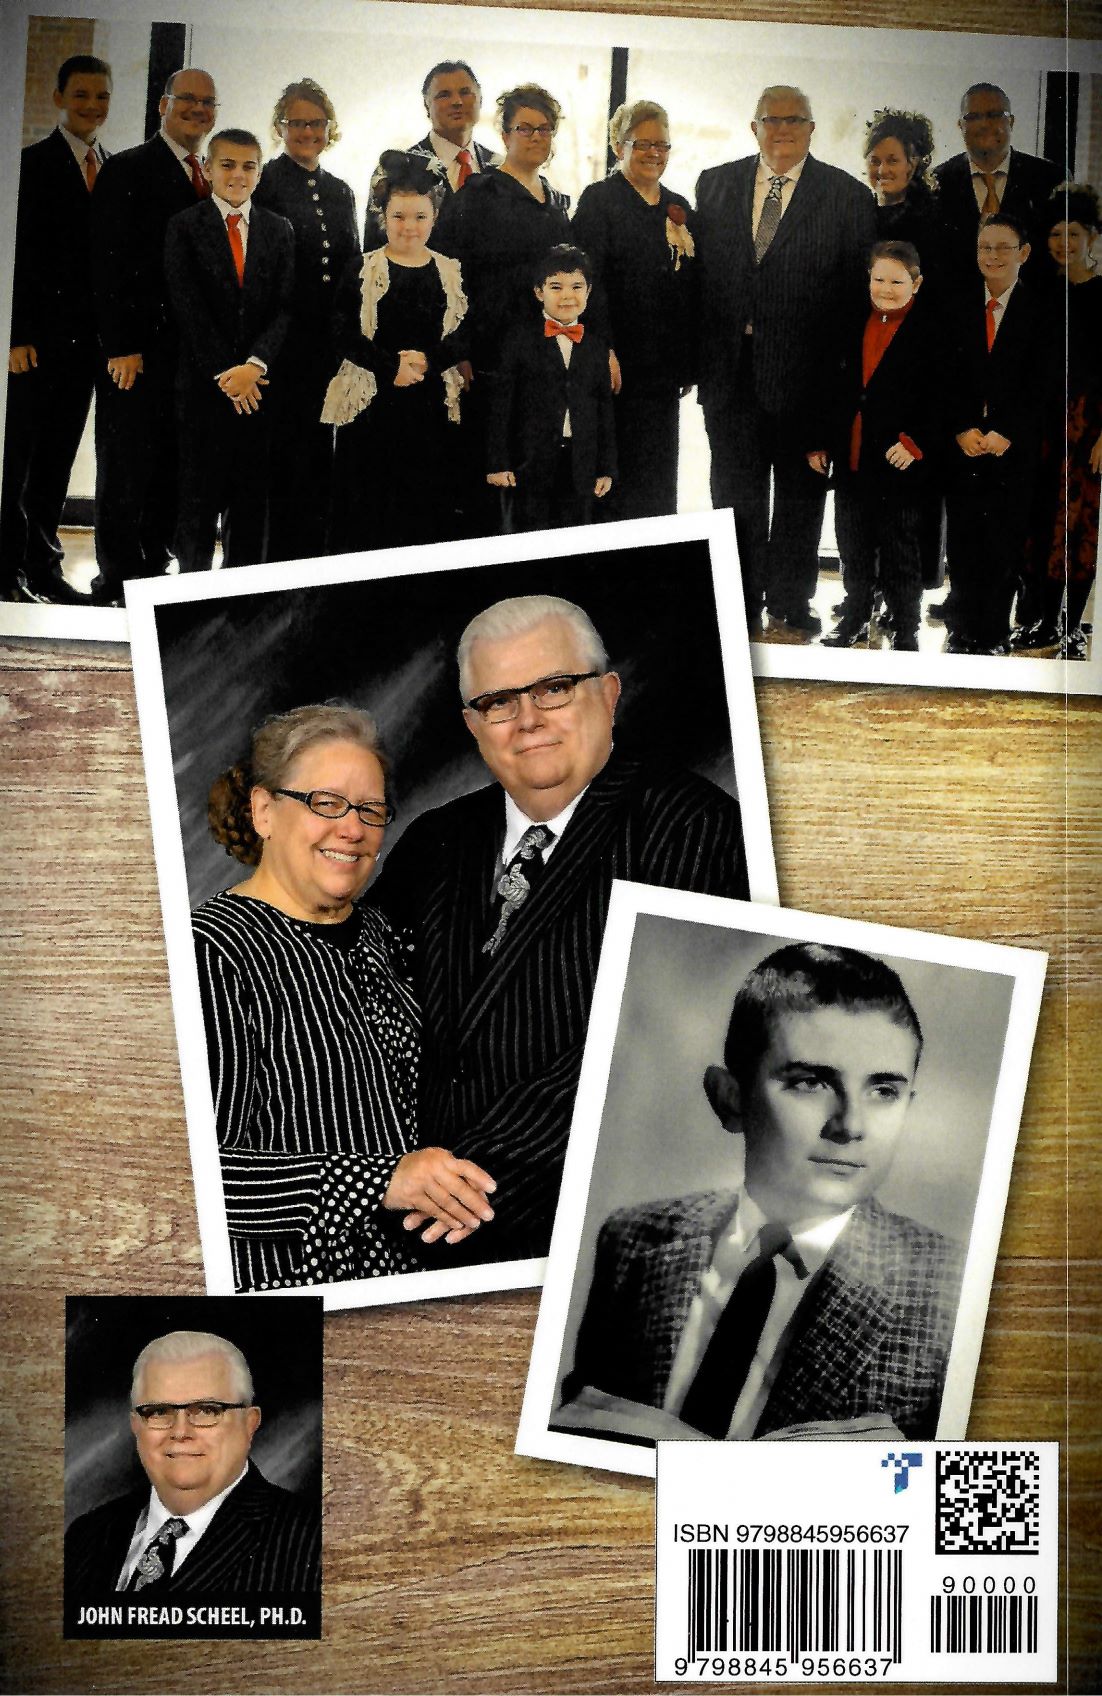 56 Years and Counting - Dr. John F Scheel